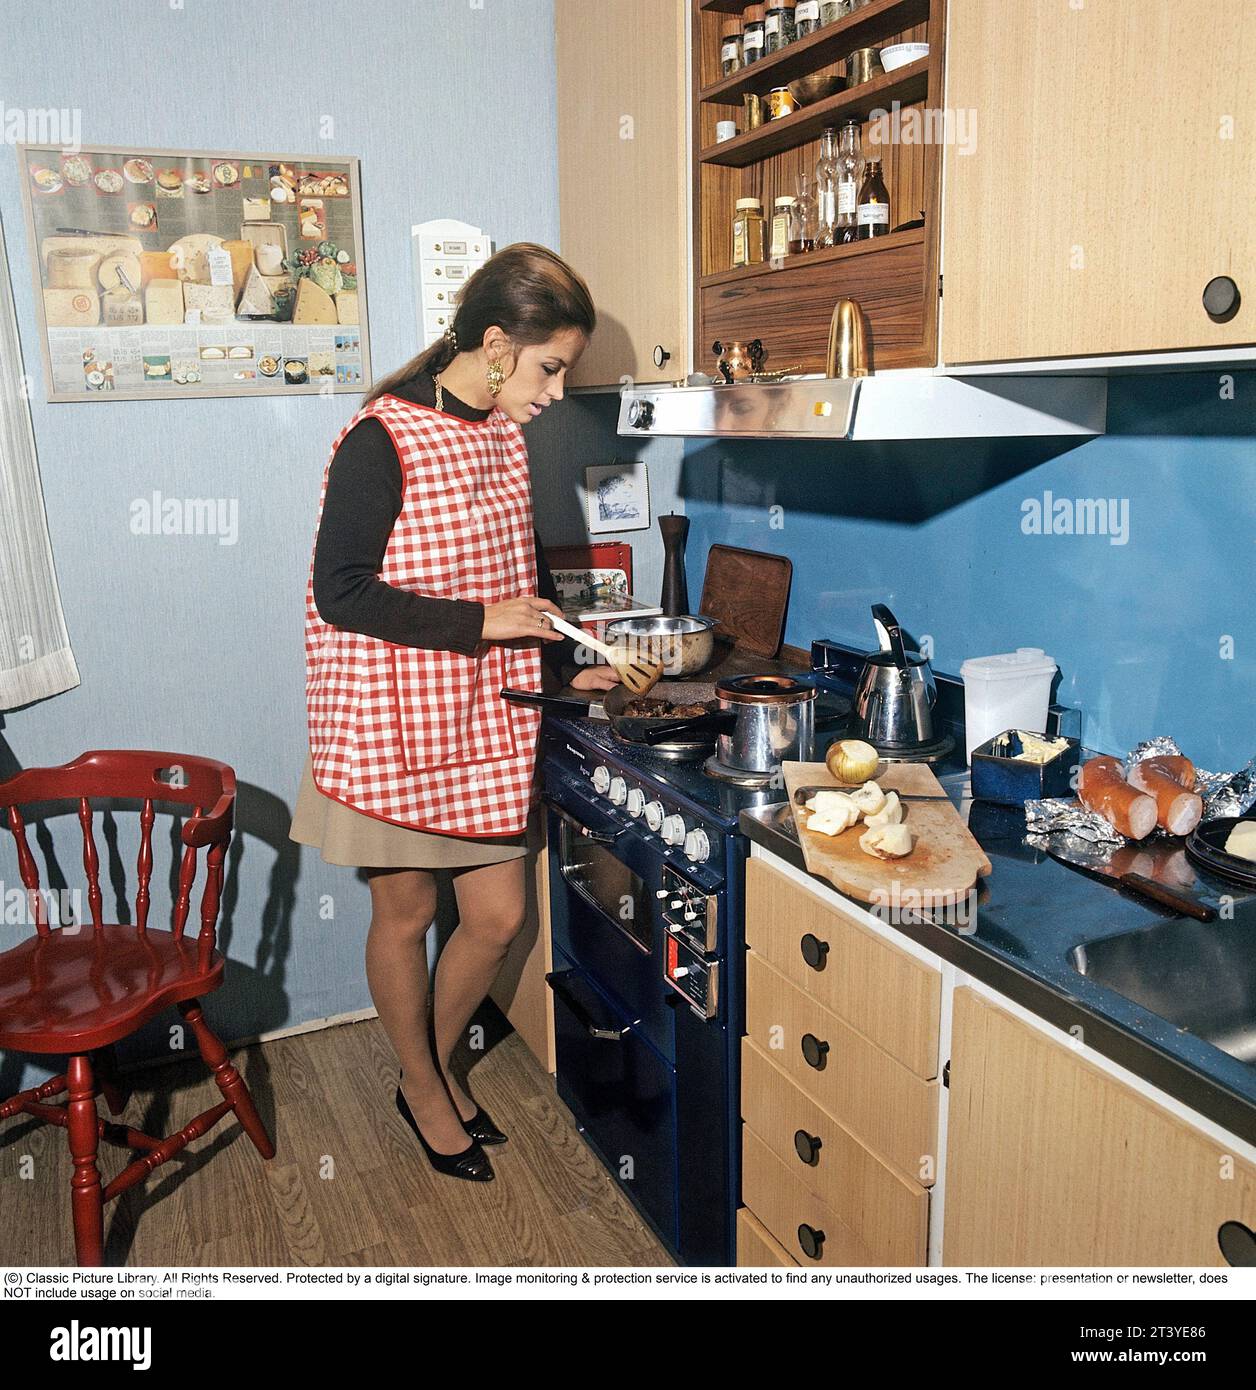 In the kitchen 1970s. Actress, singer Lill-Babs Svensson pictured in the typical 70s kitchen cooking a meal. Sweden 1972. Kristoffersson Stock Photo